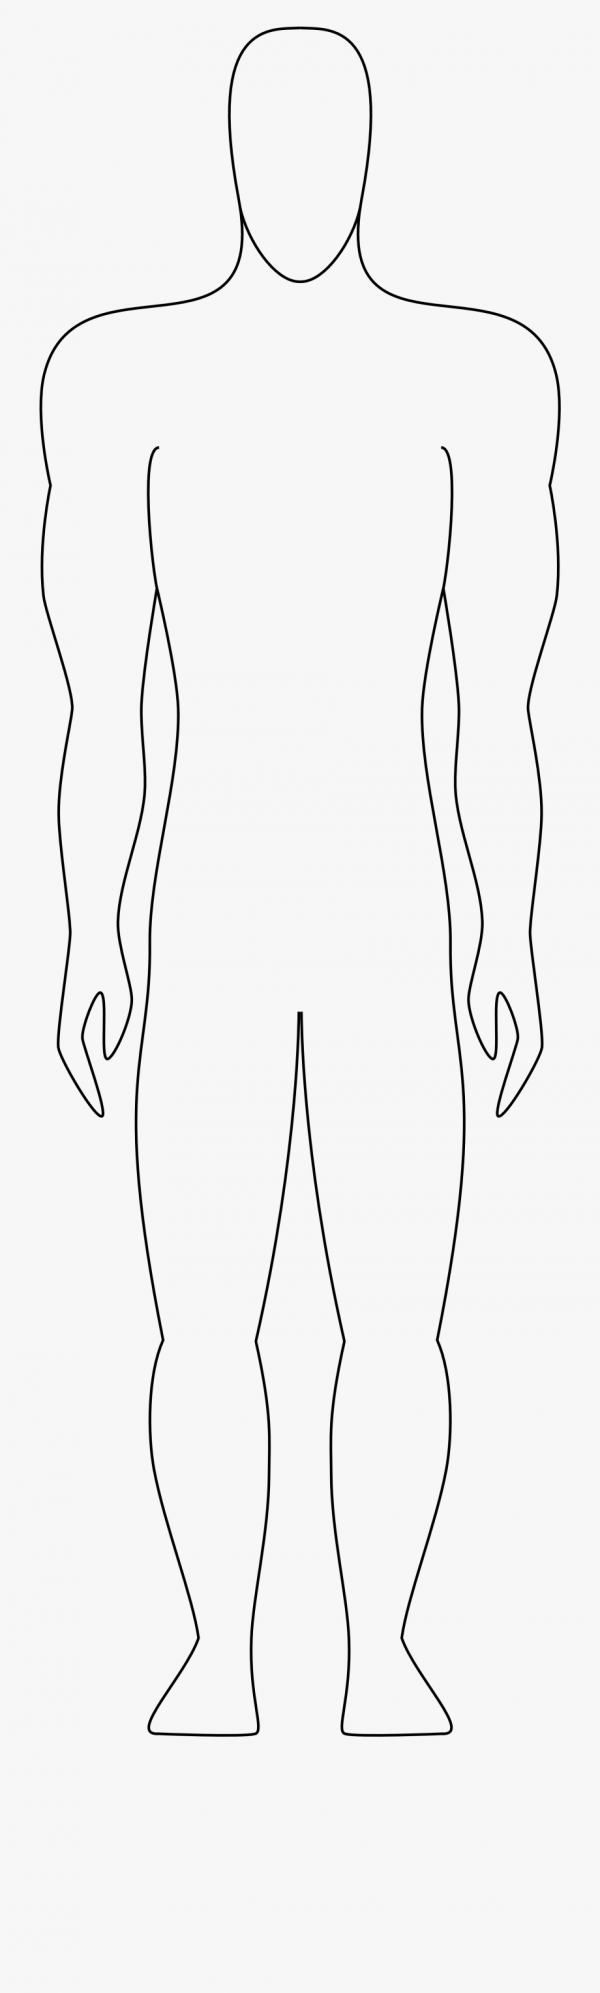 Body Outline Clipart Human and other clipart images on Cliparts pub™